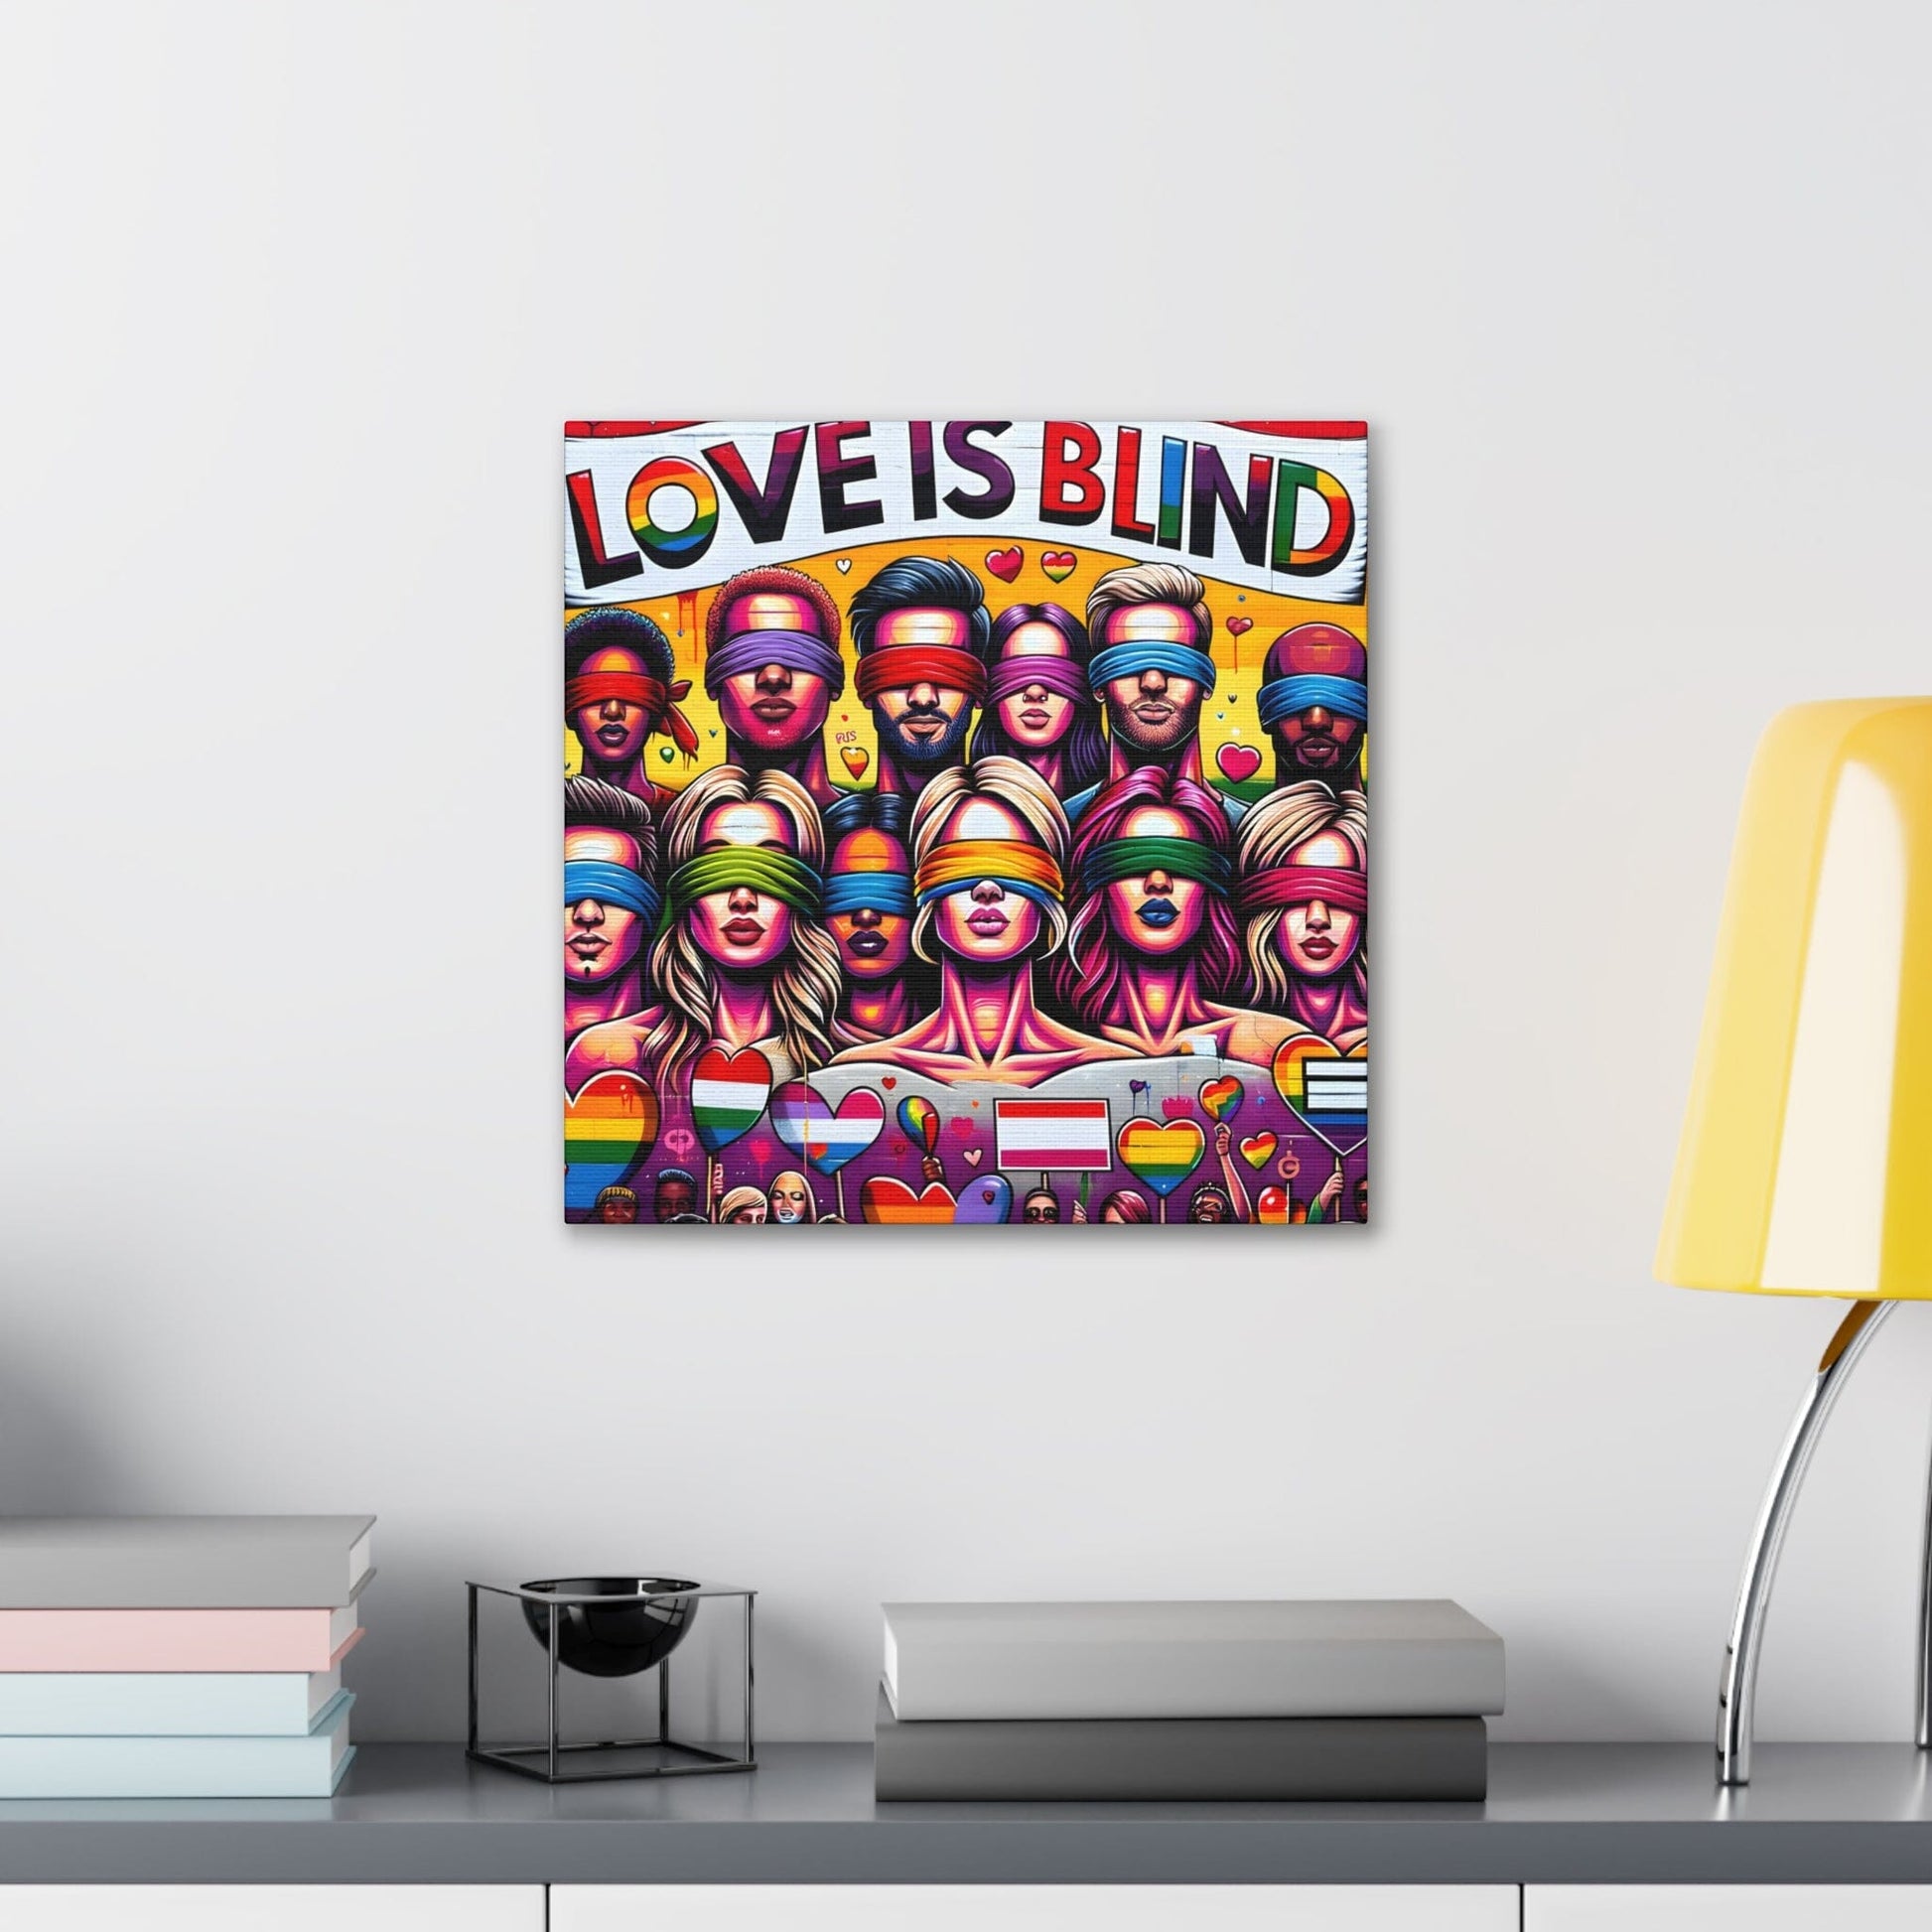 in situ with desk. Unity in Hue' by Alexi Hartwell, an artwork symbolizing inclusivity and love, featuring vibrant LGBTQ themes and urban street art style, ideal for art enthusiasts appreciative of aesthetics and social messages